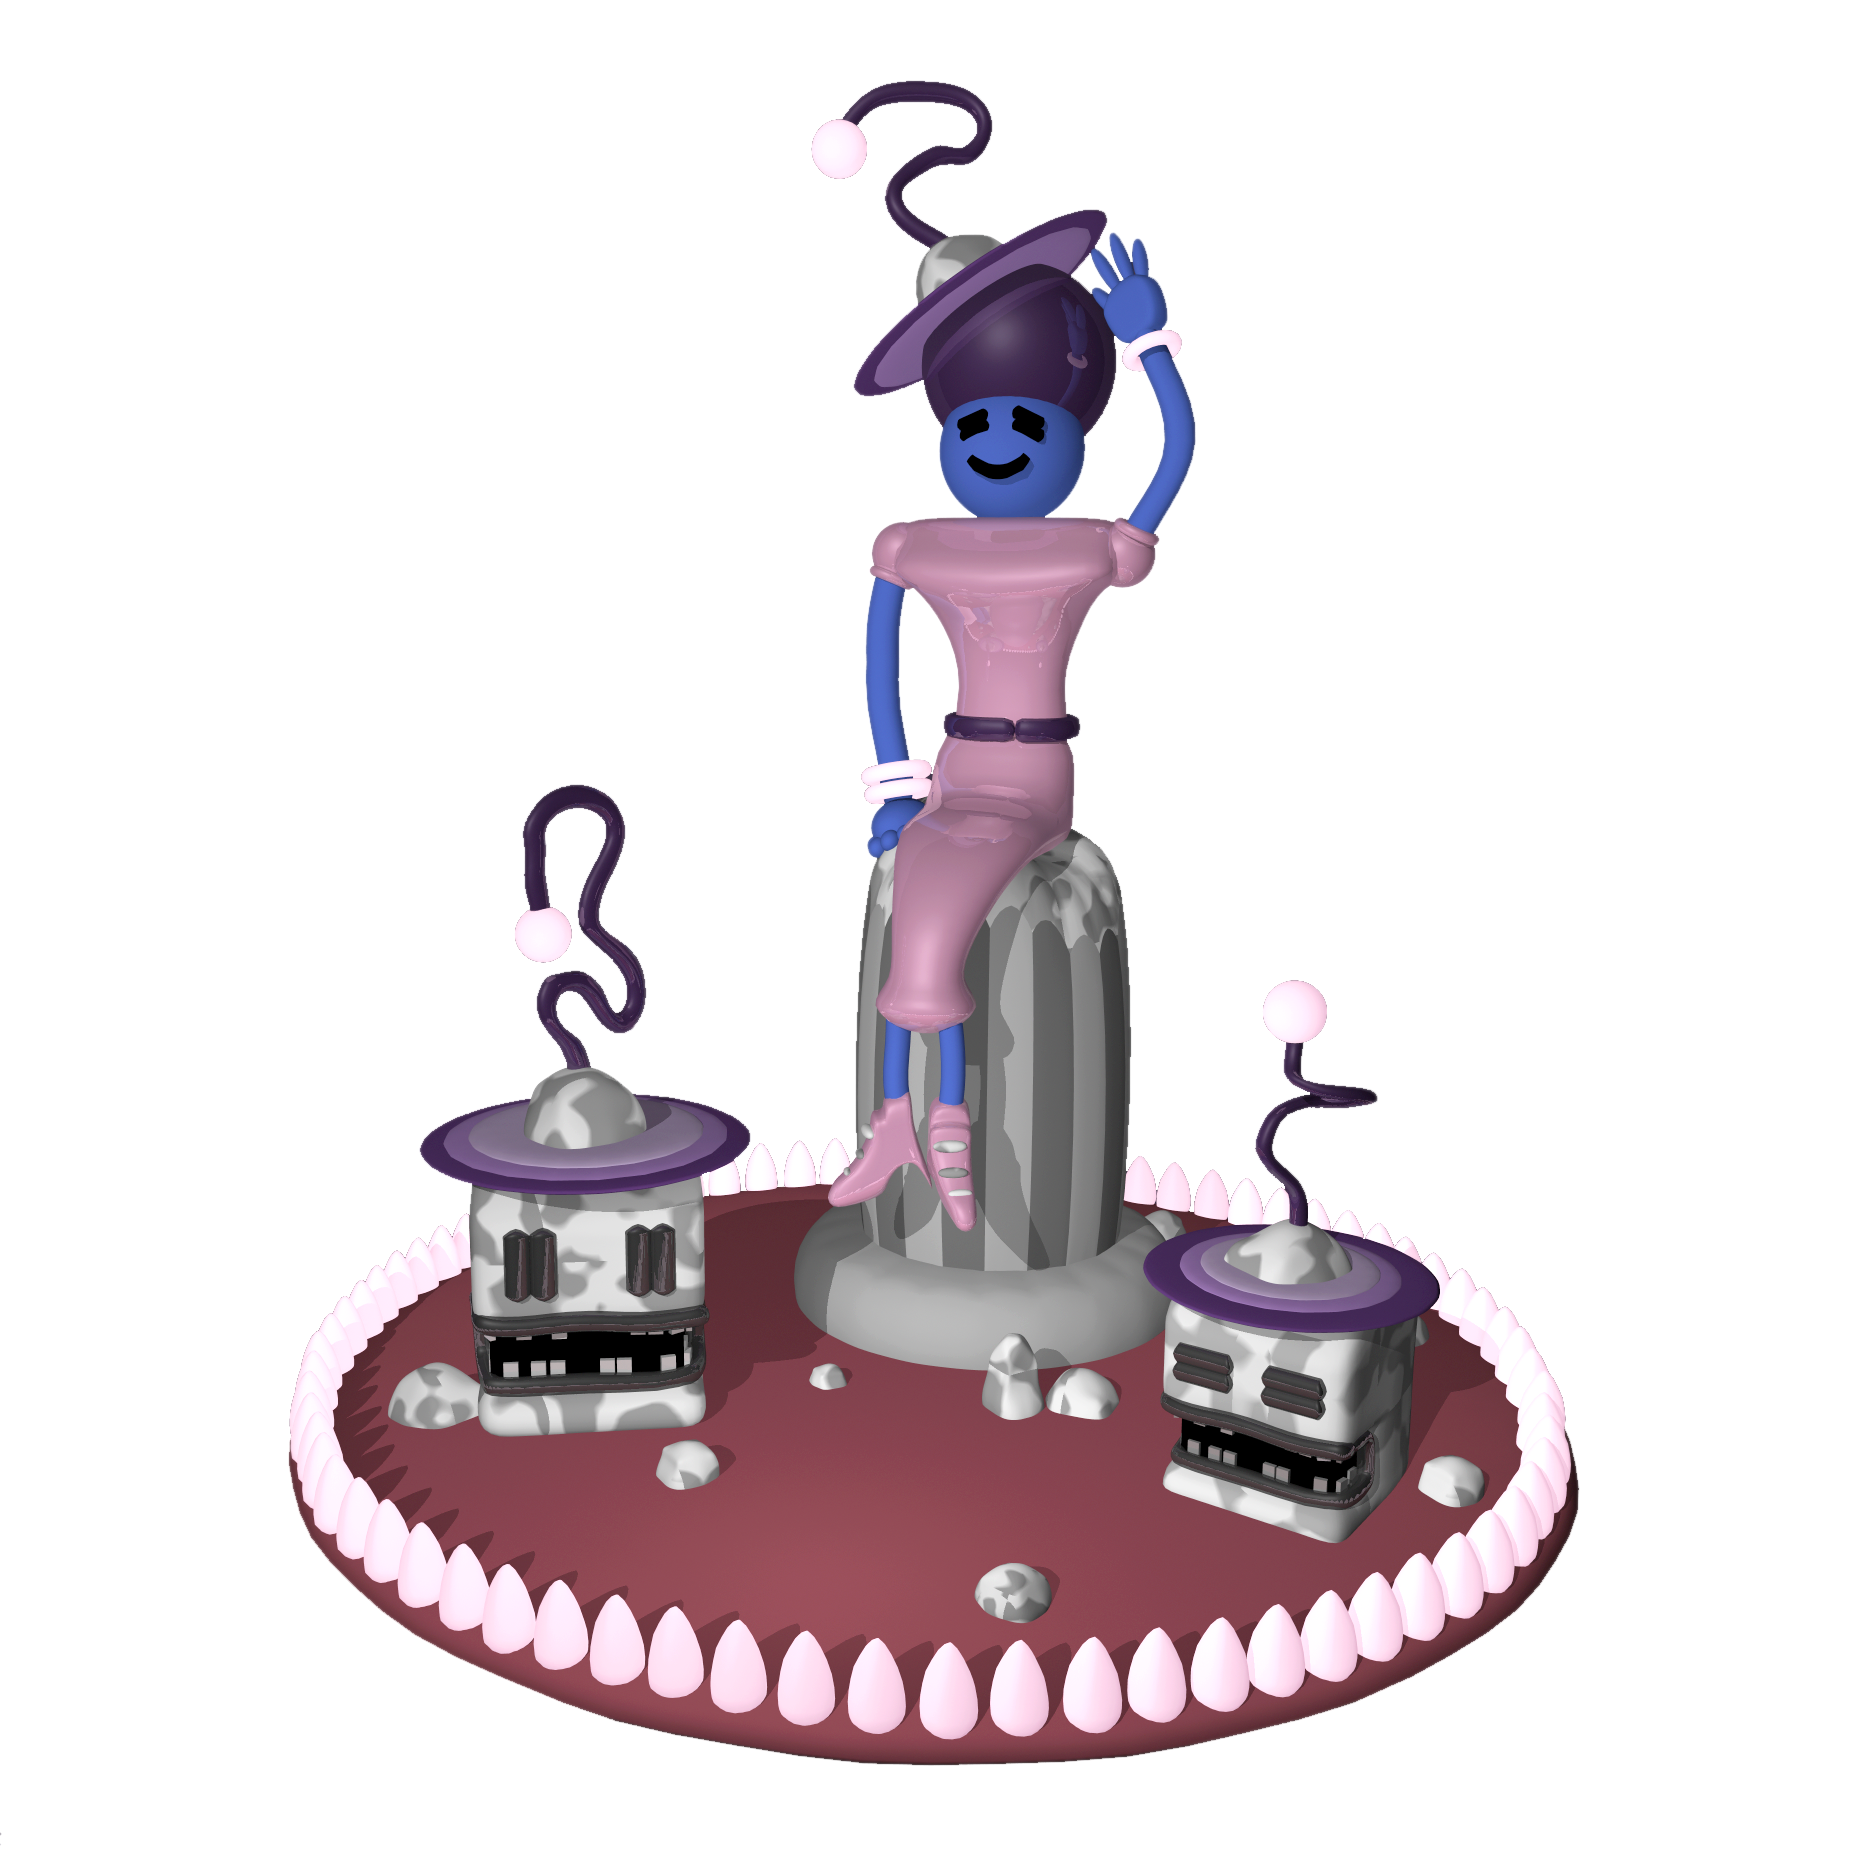 3D character with dark blue skin, and a pink dress sitting on a broken column and waving